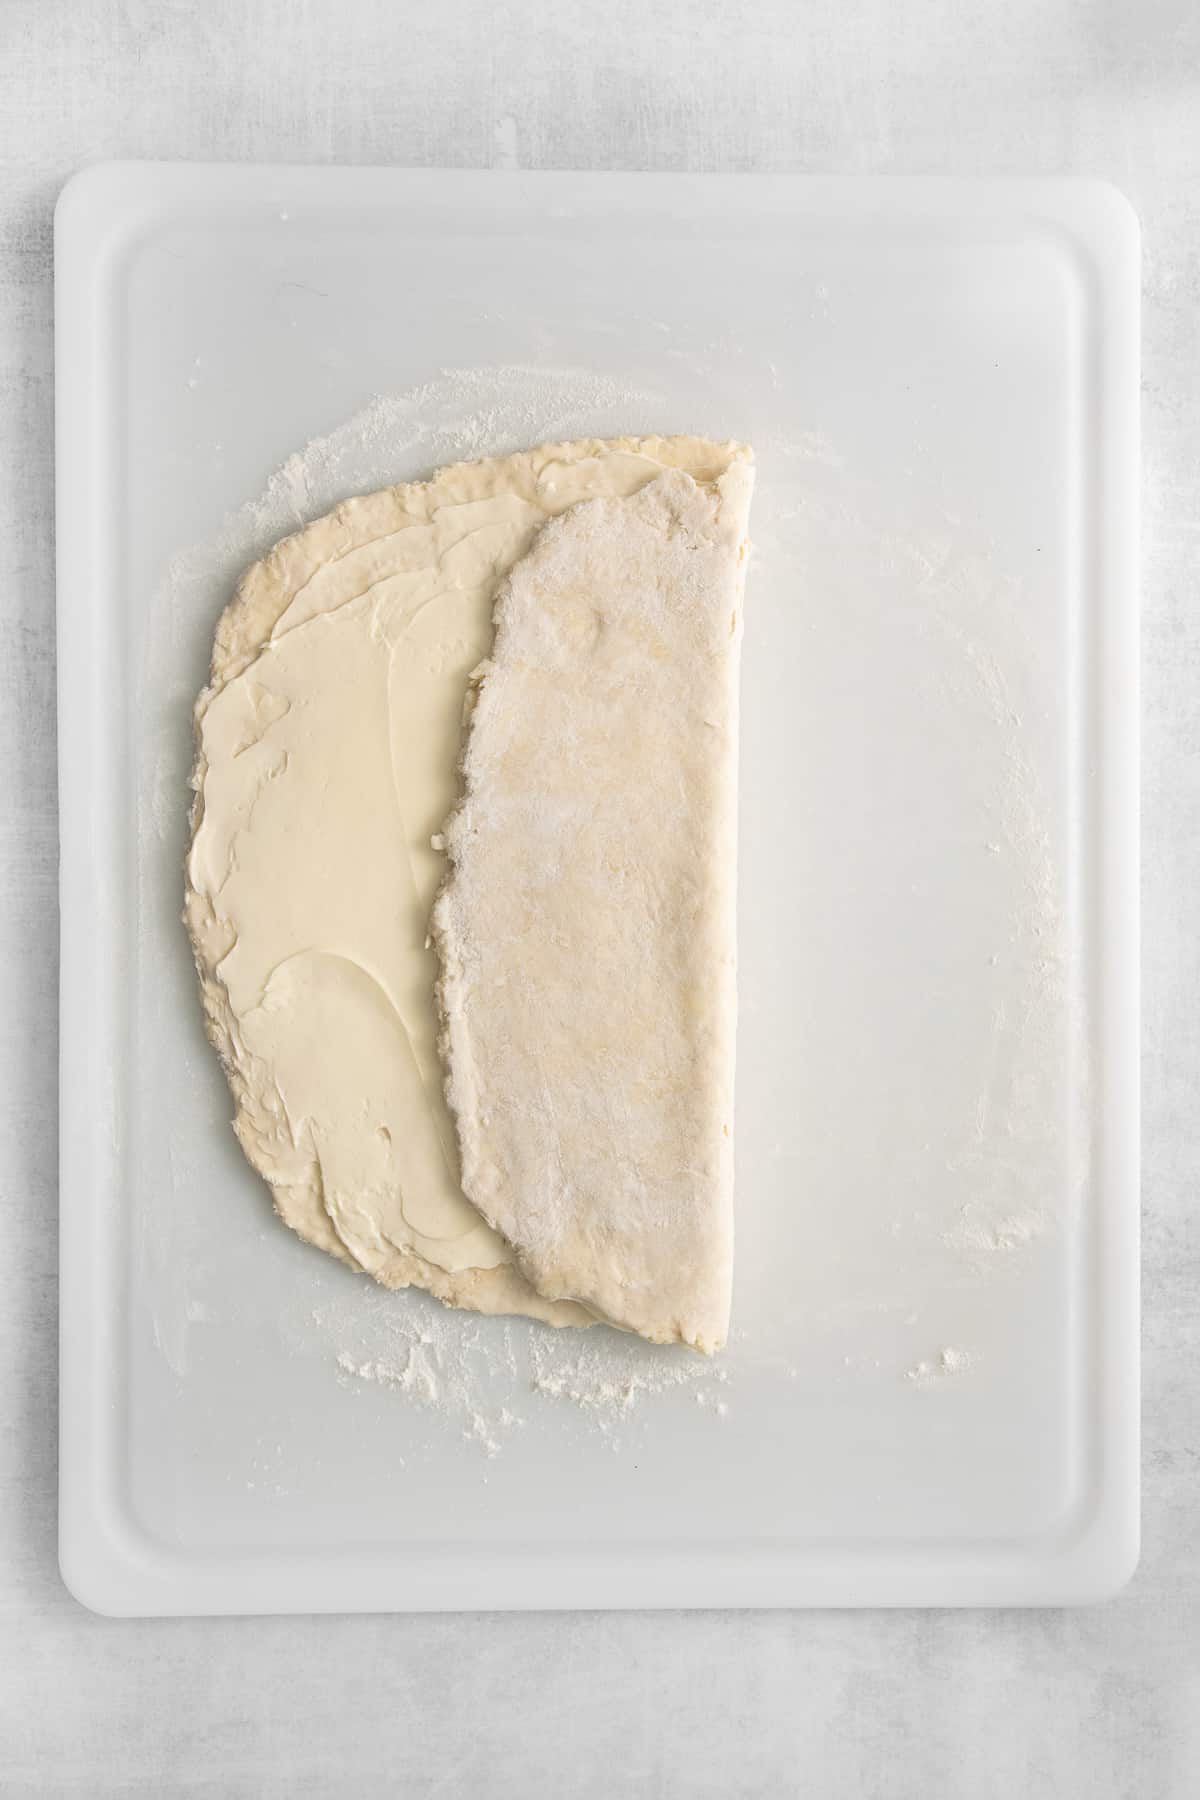 Butter spread on puff pastry dough and folded over it.